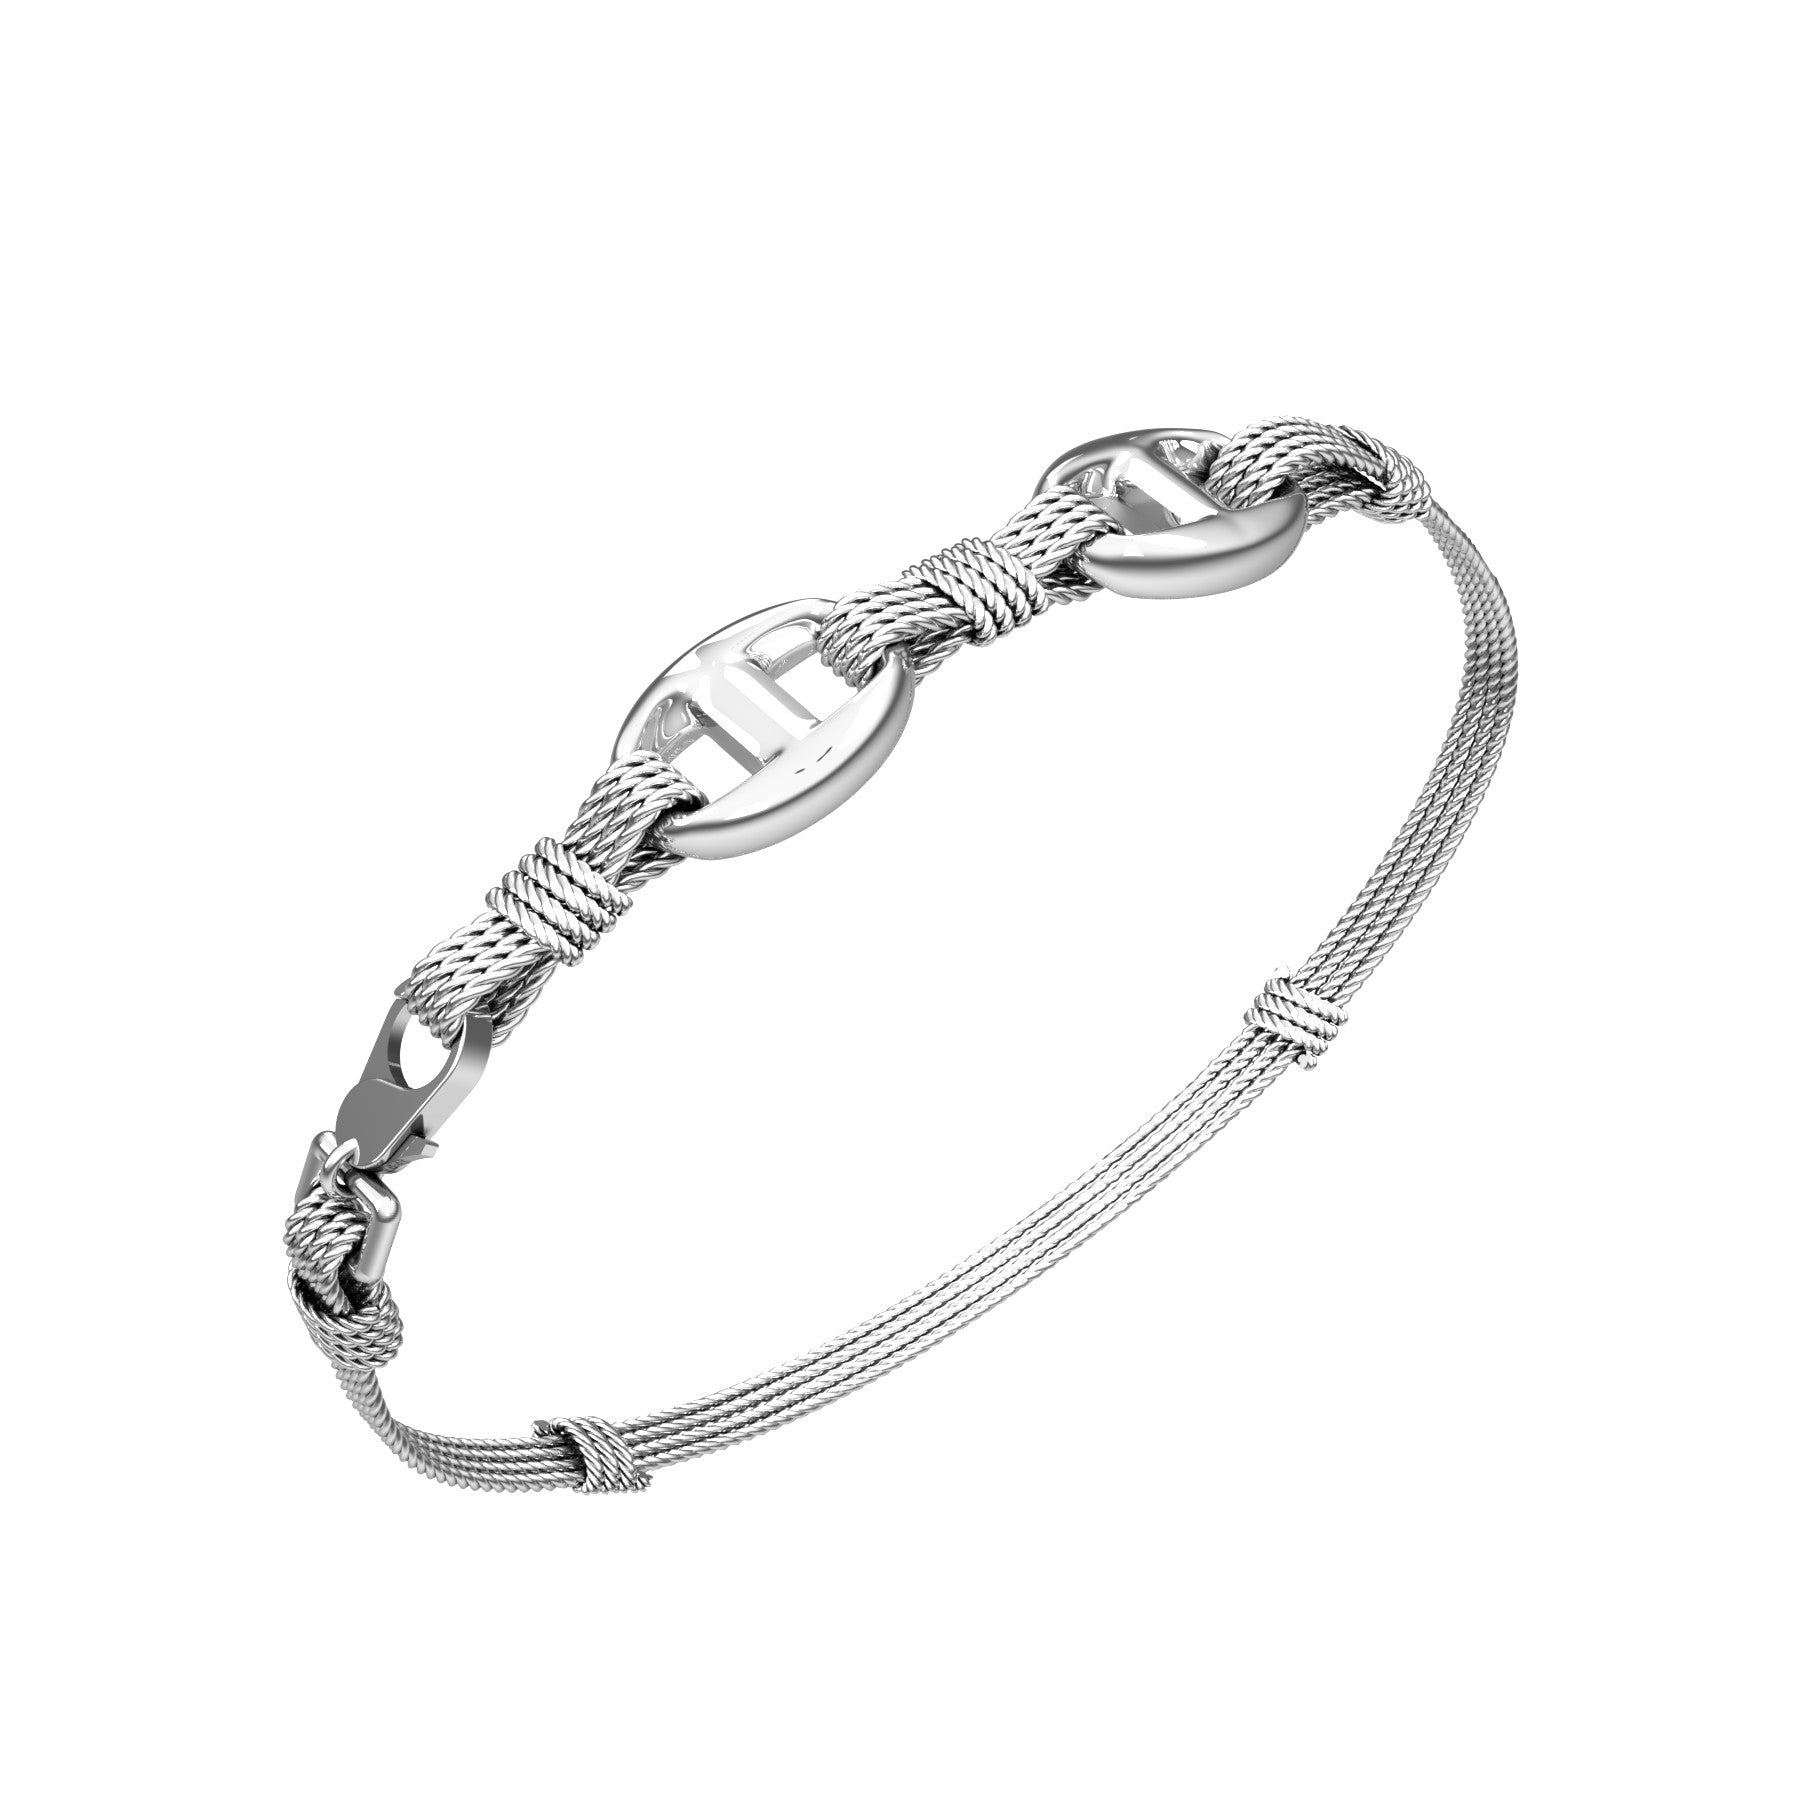 marine links and ropes bracelet, 18 k white gold, weight about 15,50 g (0,55 oz),  width 15 mm